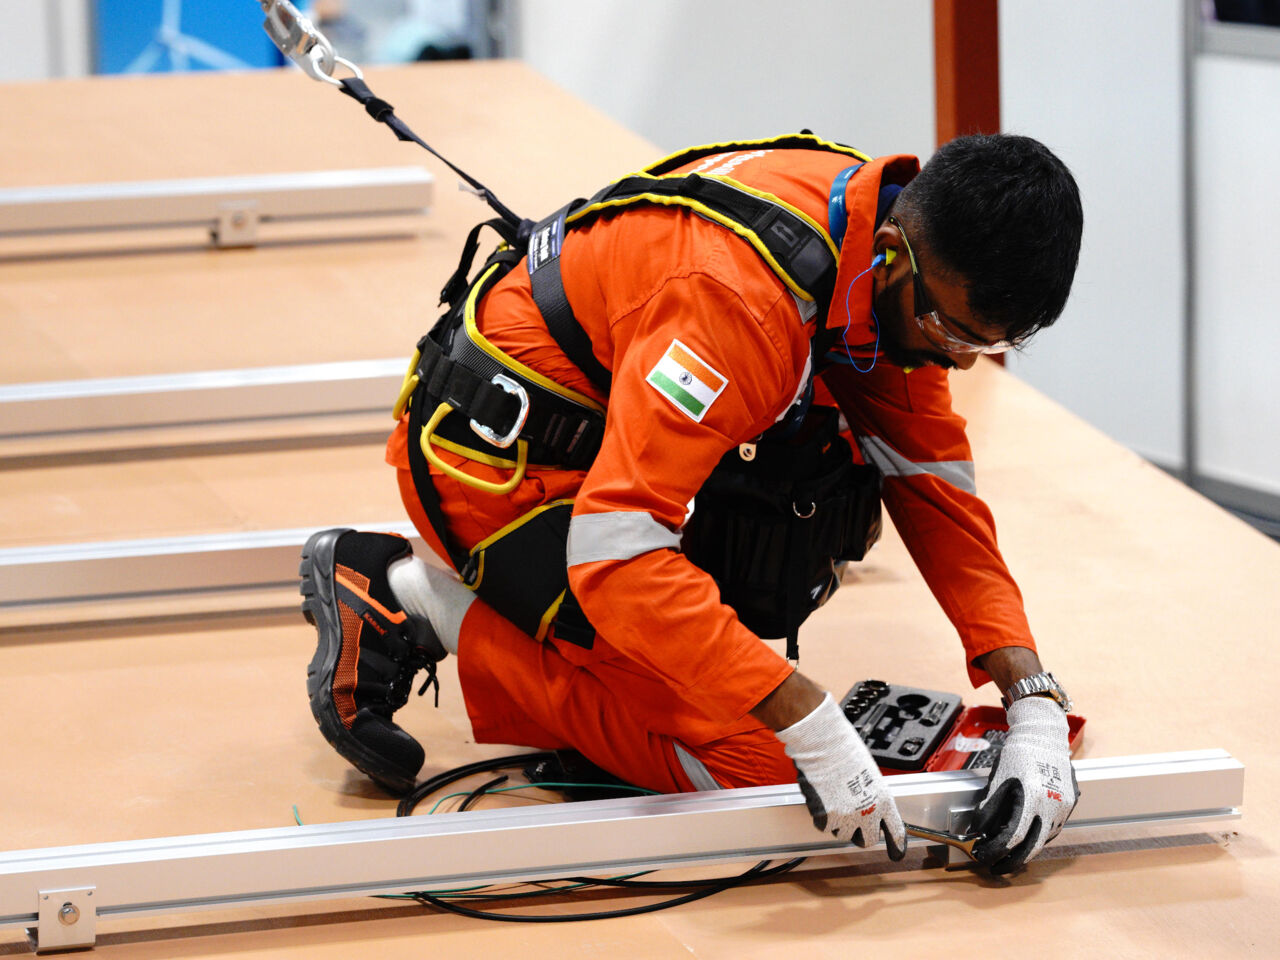 A male competitor works on a renewable energy installation during WorldSkills Competition 2022 Special Edition in Kyoto, Japan from 15-18 October 2022.
